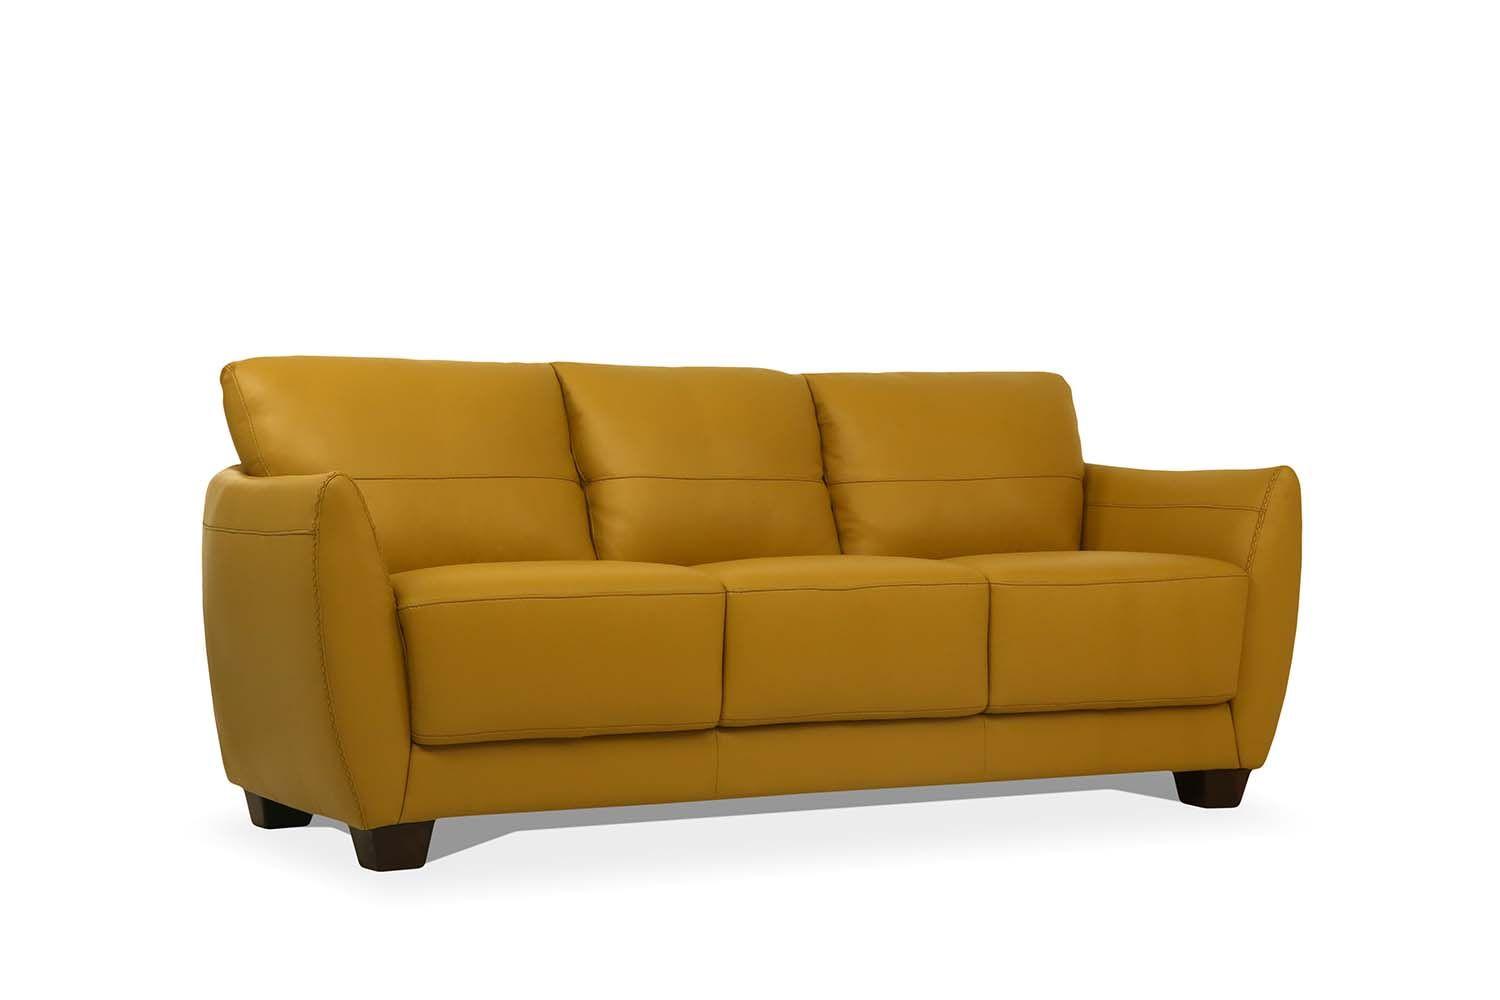 Modern, Transitional Sofa Valeria 54945 in Yellow Leather